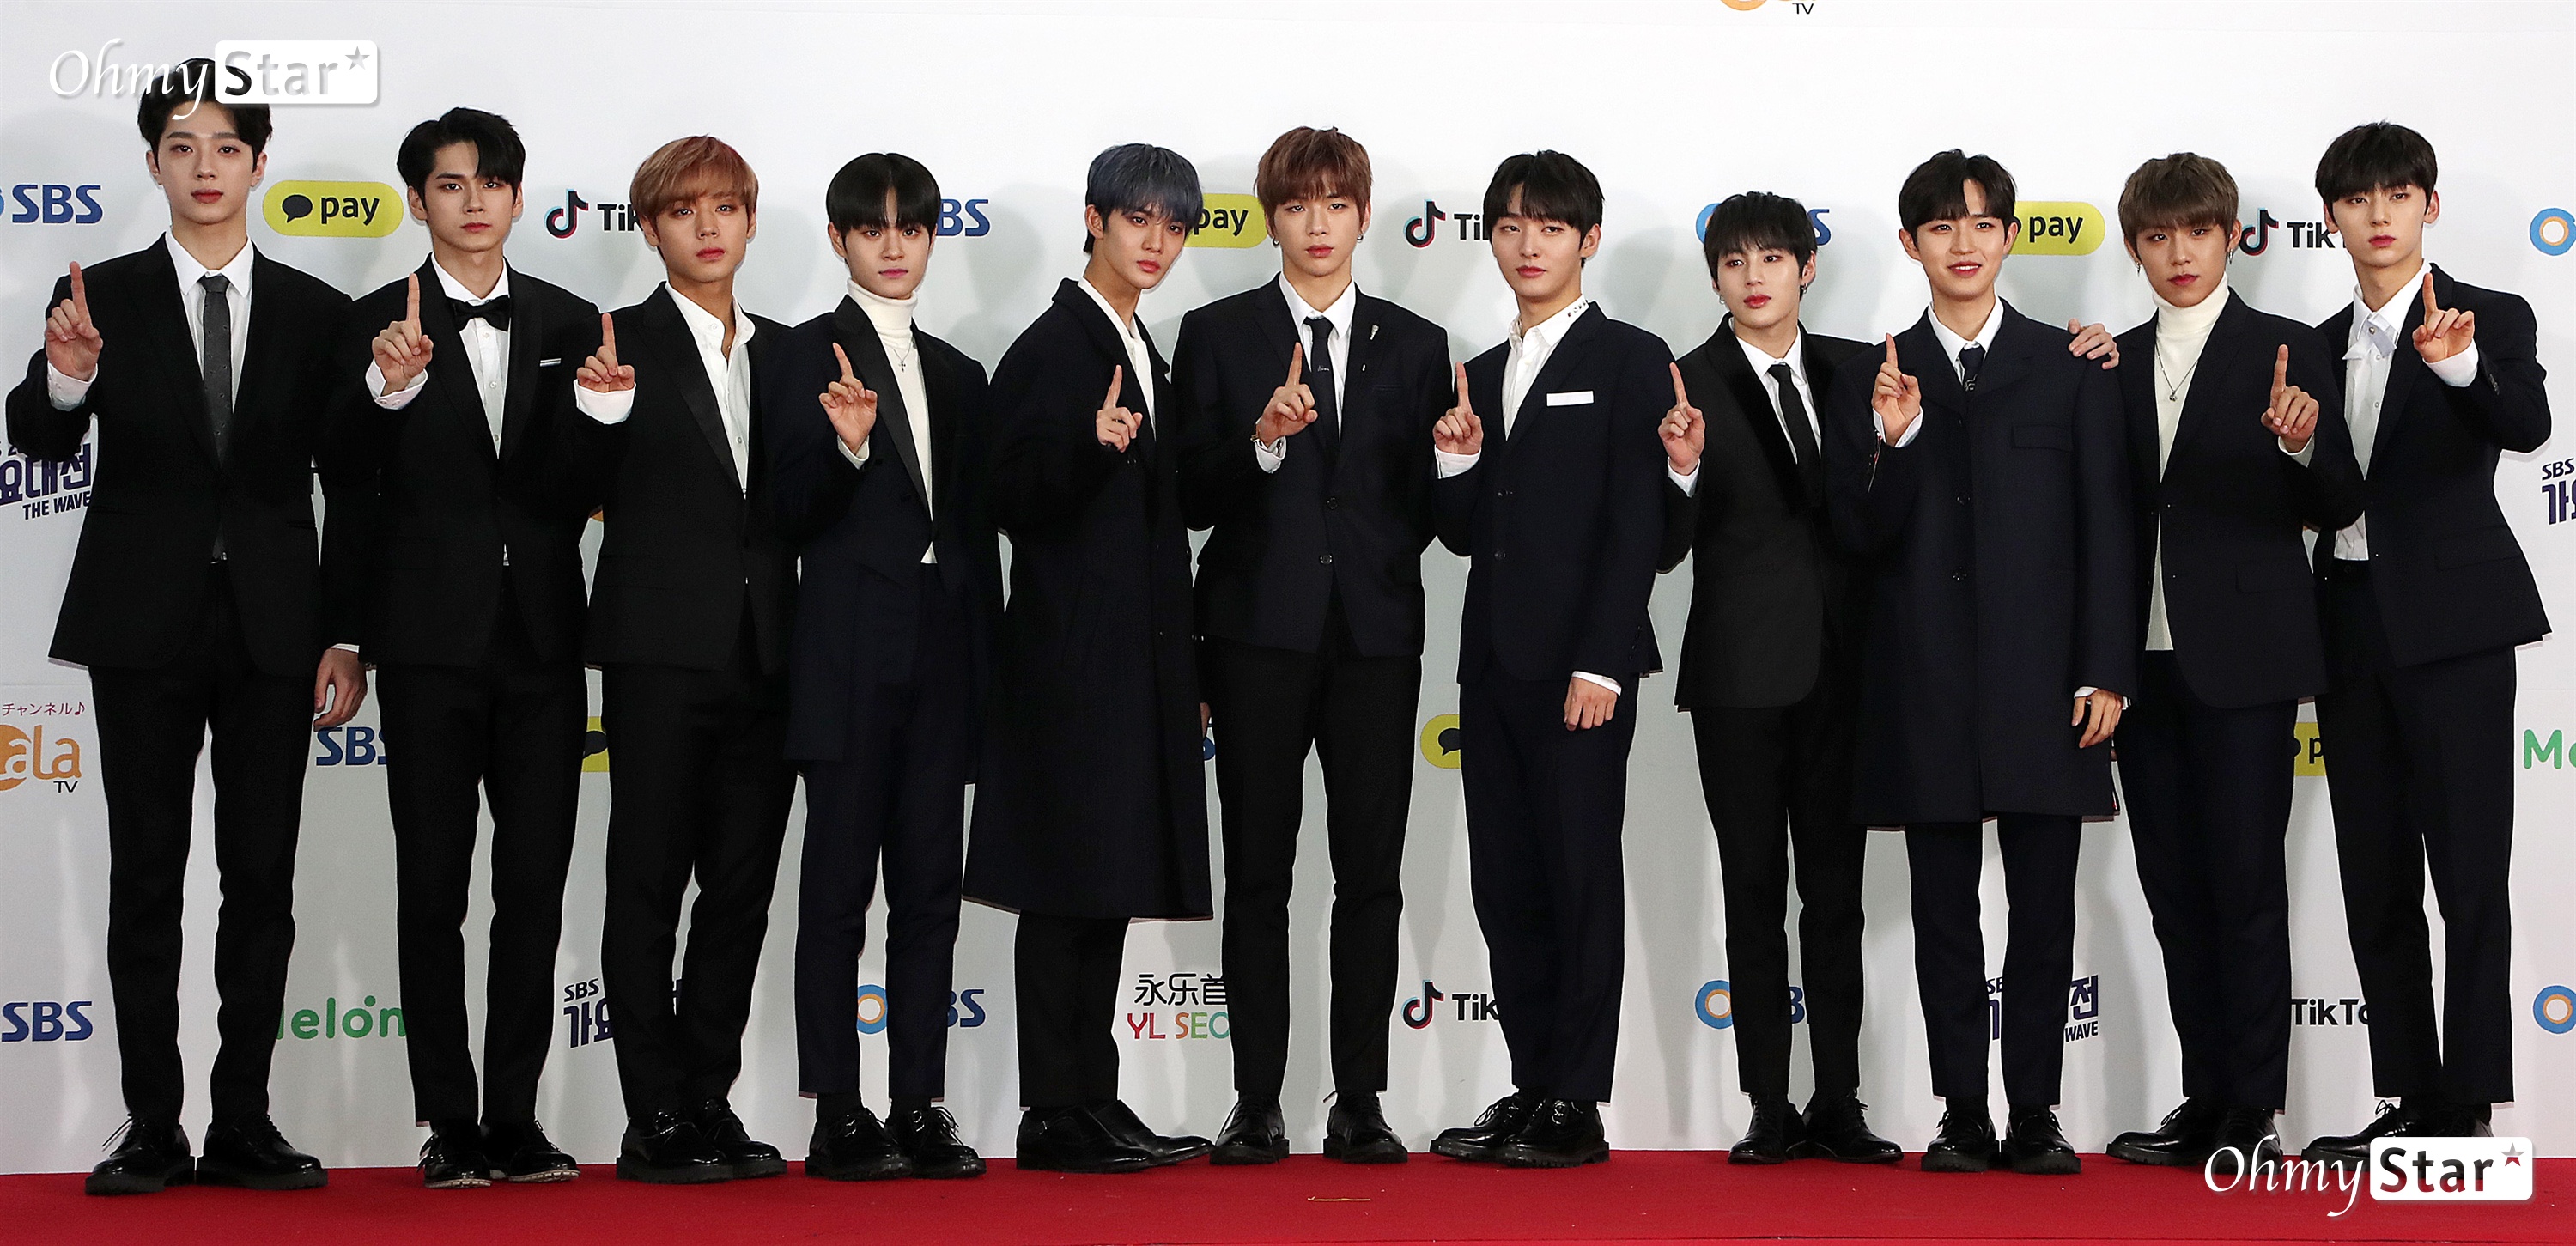 Wanna One members who have been on their own path after a year and a half of activities have secured and worked on such a huge fandom that the publics expectations and questions about their future movements were great.The 11 members did not abandon their expectations and returned to the fans without any gap at the same time that the team activity was over.As the size of each members fandom is large and solid, 11 big singers have been poured into the music industry at the same time with the start of 2019.Some of them have been in other groups before participating in Produce 101, and some of them have been trainees, so they are likely to be active in various ways that match the situation.I looked into their movements.As soon as the members fan cafes were opened, subscribers were crowded enough to paralyze the server, and SNS, which is more personal and intimate than official fan cafes, caused more explosive reactions.The number of Followers on Kang Daniels personal SNS Instagram is now 2,732,400 (as of the afternoon of the 25th).In particular, Kang Daniel and Yoon Ji-sung ended their exclusive contract with MMO Entertainment, which was an existing agency, on January 31, and started to work on the base camp by announcing the new Departure at LM Entertainment on February 1.In addition, Hwang Min-hyun signed a contract with Pledice Entertainment, which has been in operation so far.His team NUEST has signed a contract with all five people to continue their unwavering activities.Park Jihoon met a total of 7,000 fans through his first solo fan meeting, First Edition Seoul (FIRST EDITION IN SEOUL), which was held twice, and showed various aspects such as dance, song, rap, and charm, and made special memories with fans.Ong Sung-woo also held his first solo Asia fan meeting tour, <Eternity>, met fans from various countries, and Yoon Ji-sung also held his first solo fan meeting in Blue Square on the 23rd ~ 24th.On the 20th, Yoon Ji-sung released his first solo album, Aside , which he released as a solo album with six songs despite his busy career as a Wanna One.The fandom name of Yoon Ji-sung is Bobal; its also fun to watch what the individual fandom names of Wanna One members will be.Ha Sung-woon will release his solo mini album My Moment on the 28th.The music video teaser of the title song BIRD is released and it is entering the countdown to show a new look by raising expectations.Kang Daniel is set to be solo debut in April.Some members return to team activities, not solos.As mentioned earlier, Hwang Min-hyun is imminent to comeback as NUEST, and in the case of Rygwanlin, he will be a member of Cube Entertainments new unit.The win-win moves of members from Wanna One also draw attention: Park Jihoon and Bae Jin Young were recently selected as makeup brand advertising models at the same time.In addition, Bae Jin Young fired support for his fan cafe when he released his solo album of Yoon Ji-sung and his solo song Do not forget.11 future moves of Wanna One to spur personal activities after dissolution